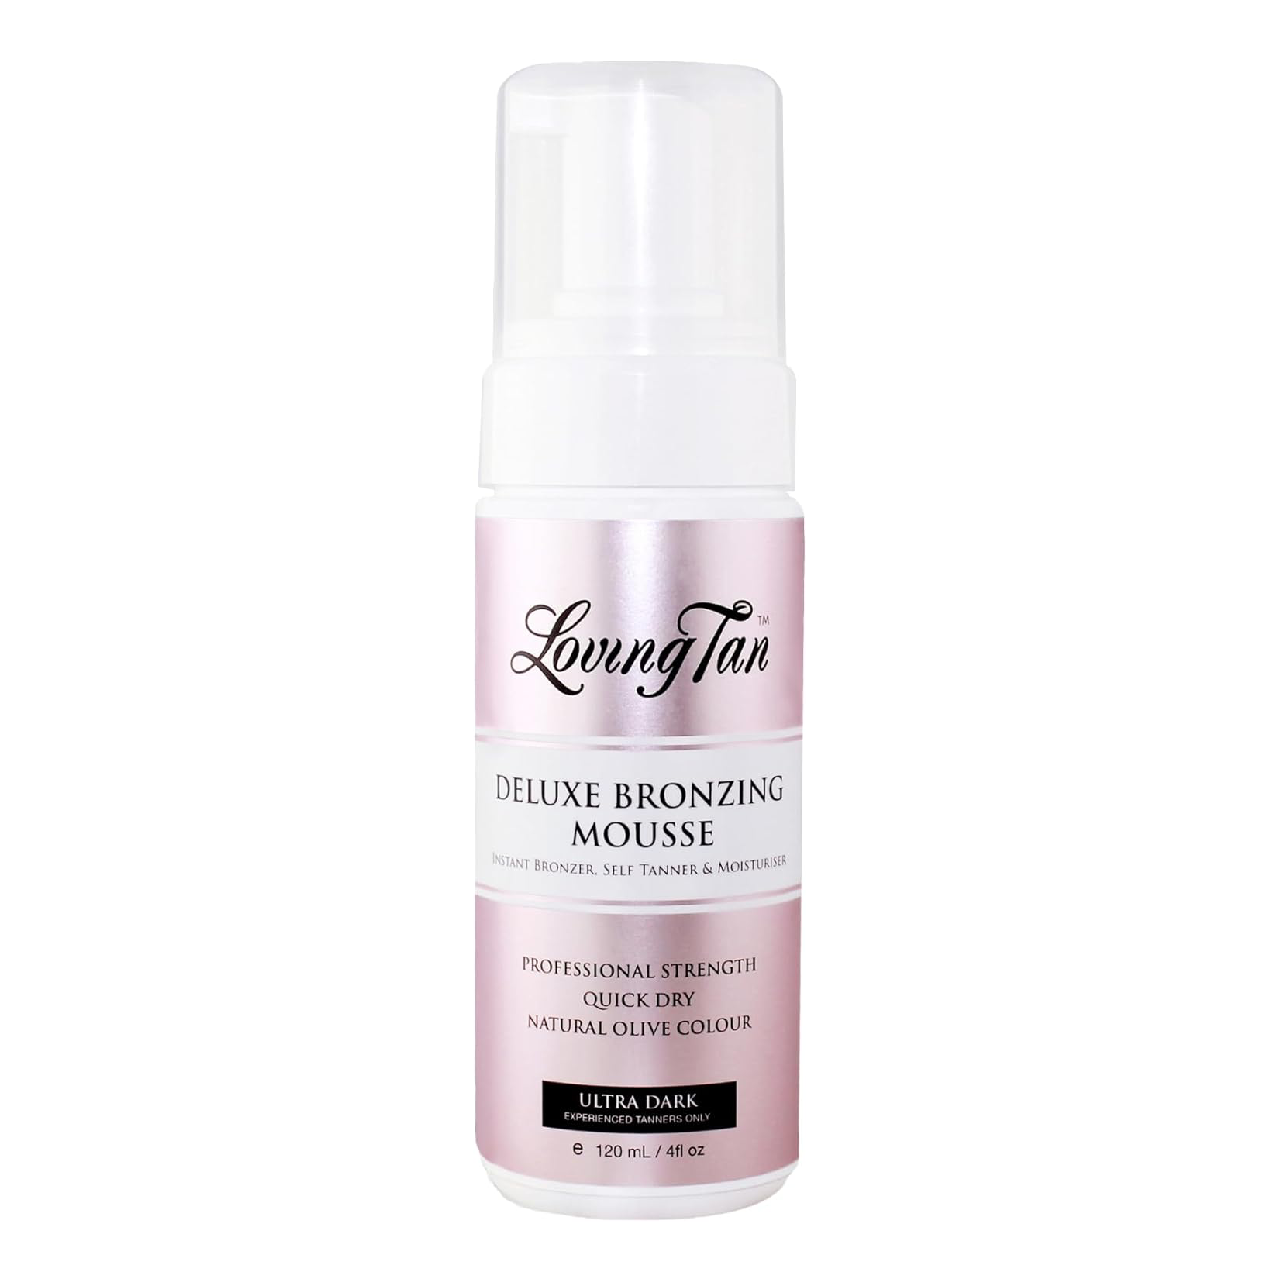 Bottle of Loving Tan Deluxe Bronzing Mousse on a white background.